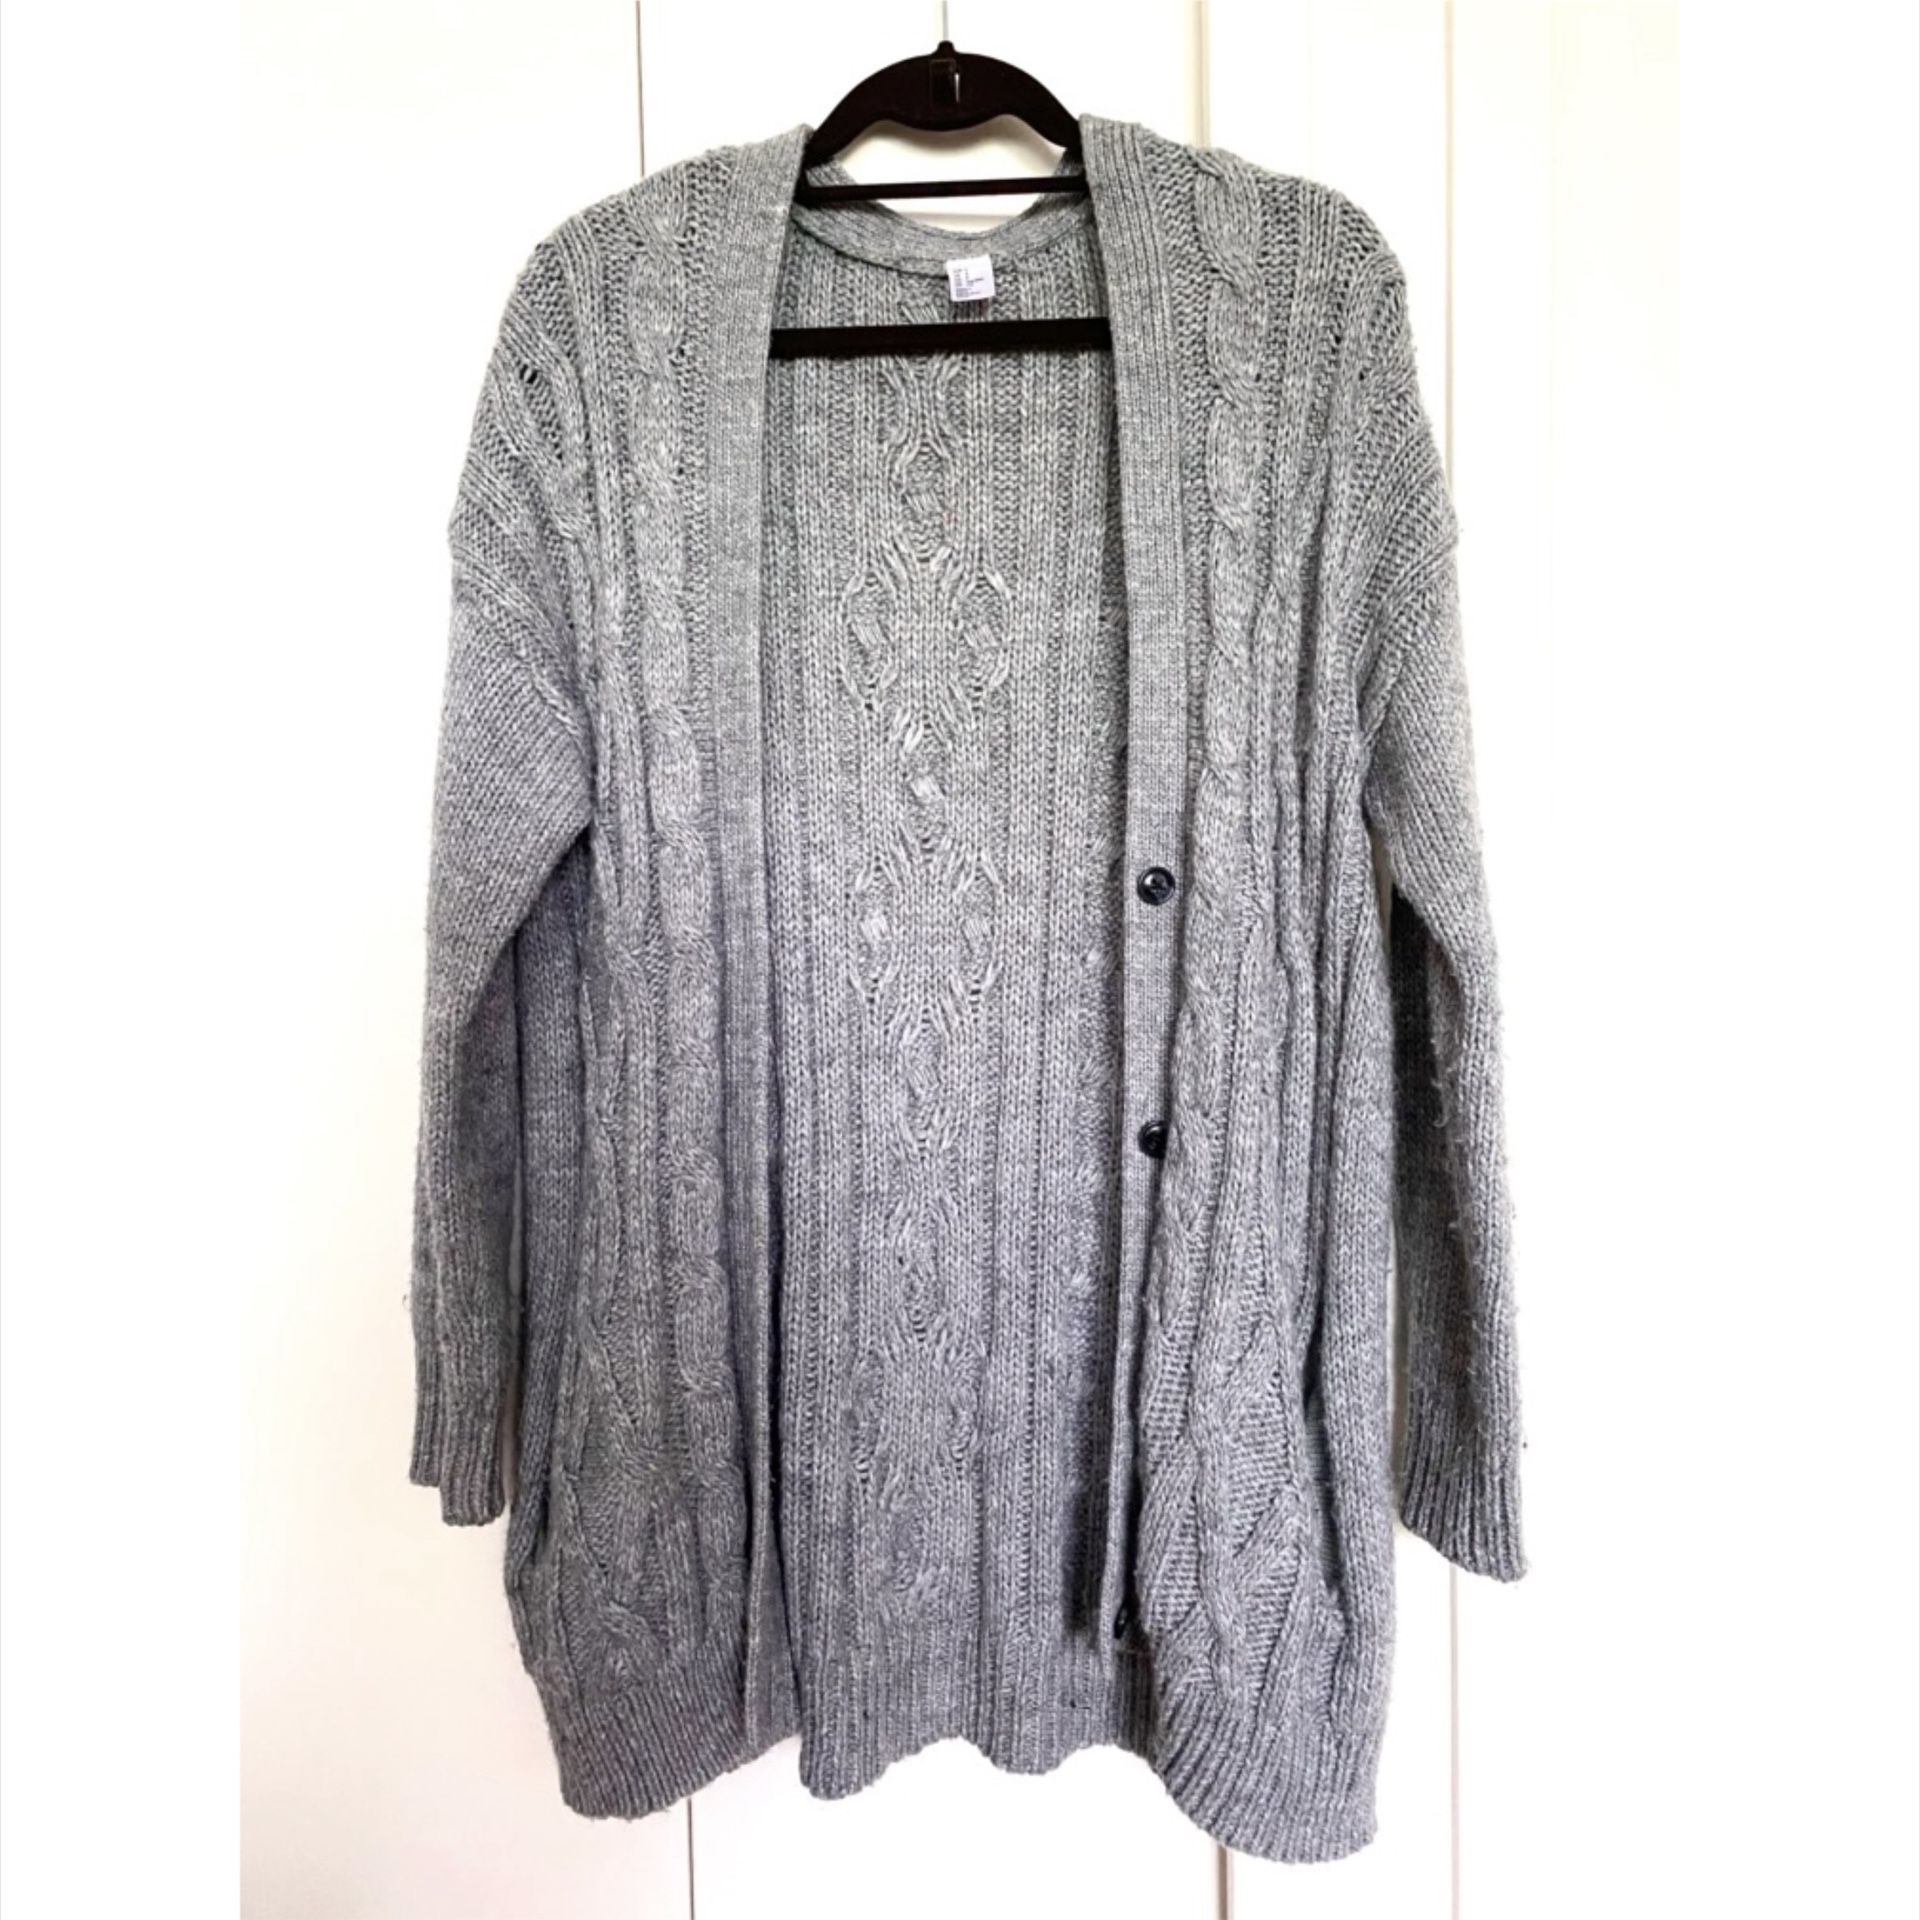 Gray Long Cable Knit Open Front Sweater with Buttons